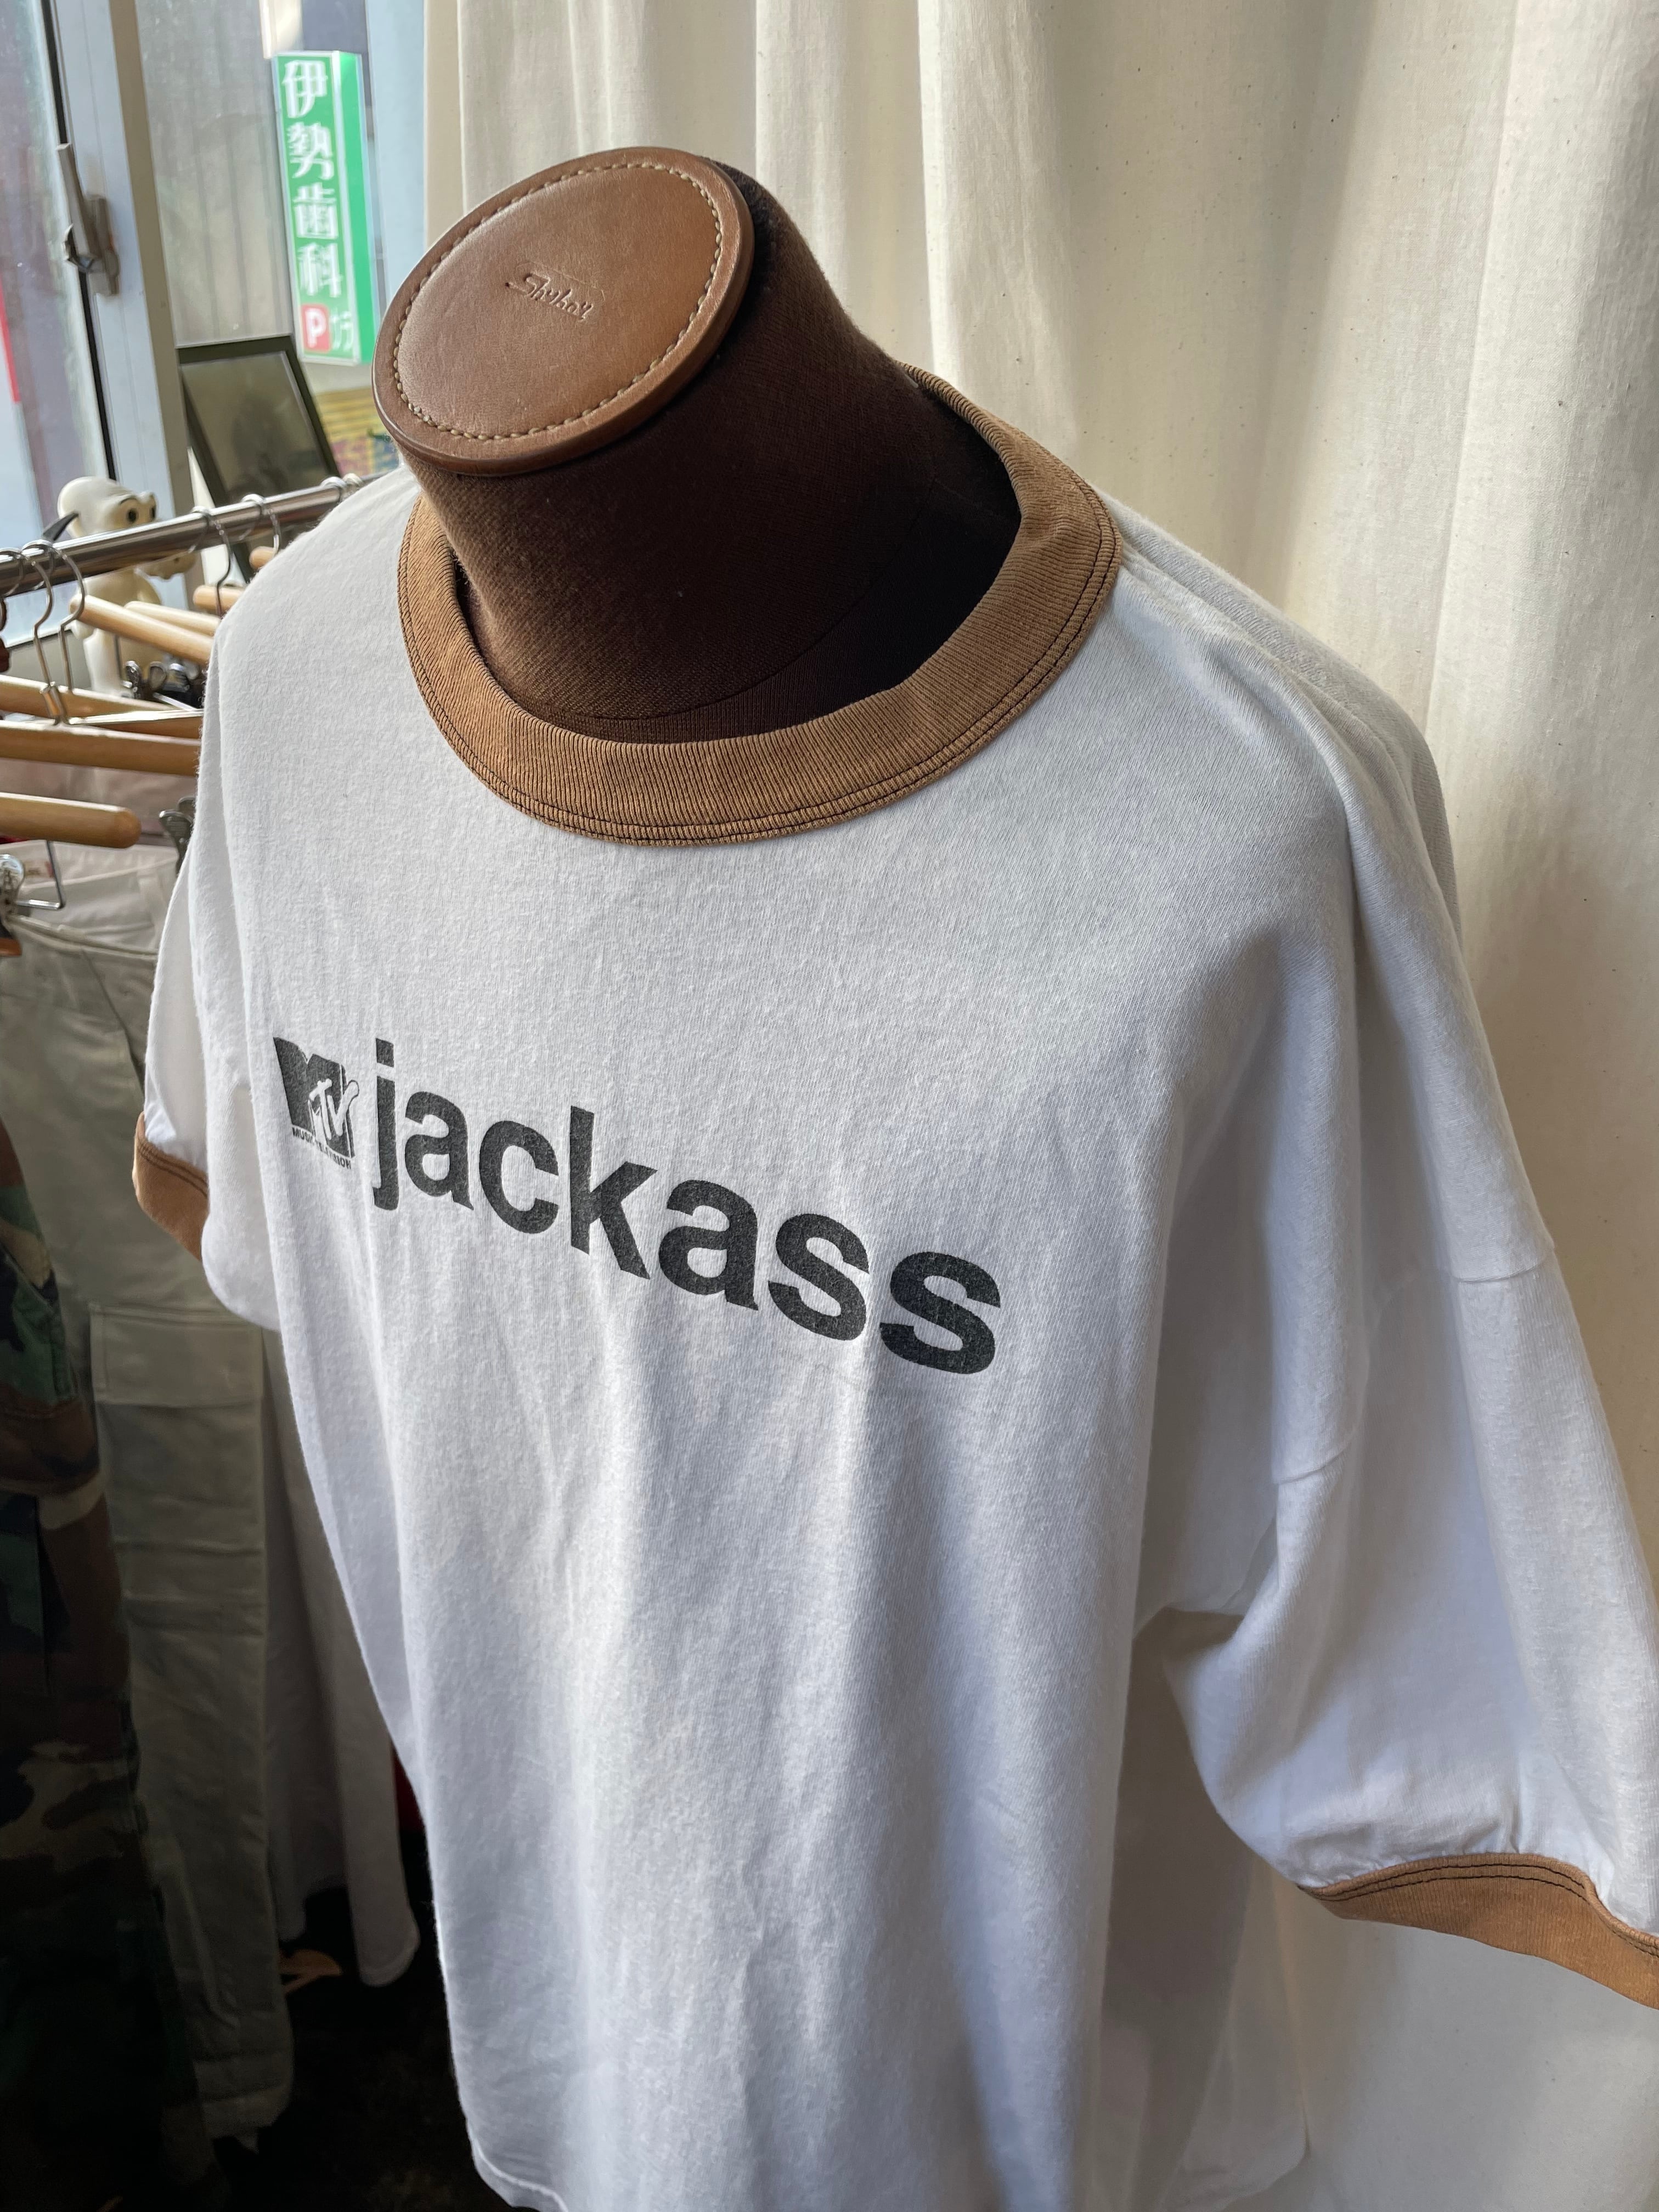 00's MTV jackass プリントTシャツ　ジャッカス　リンガーT | used clothing SHYBOY powered by BASE